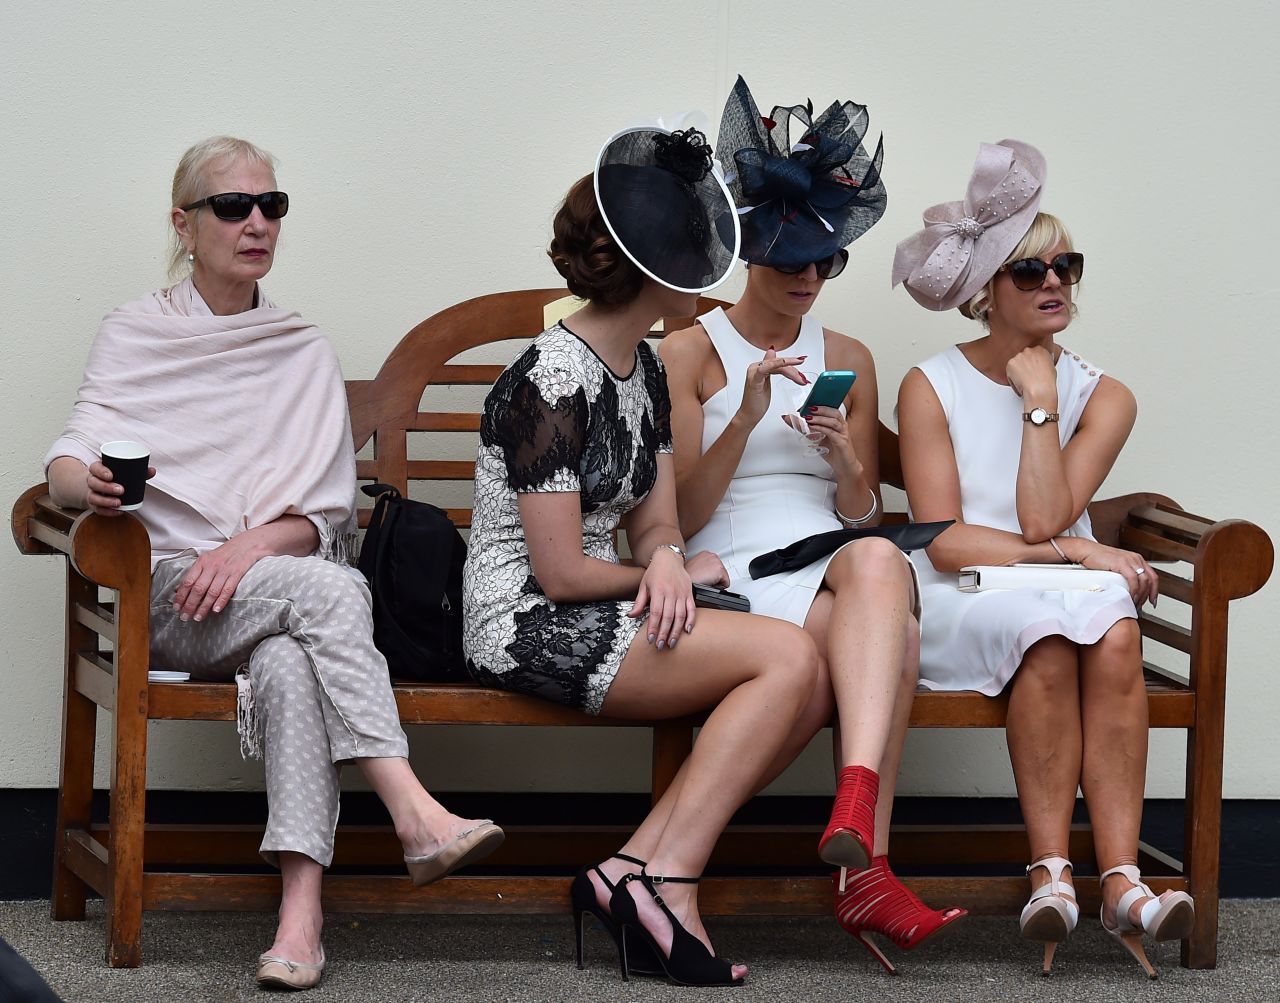 A group of female racegoers gather together to take a break from the action on the turf.